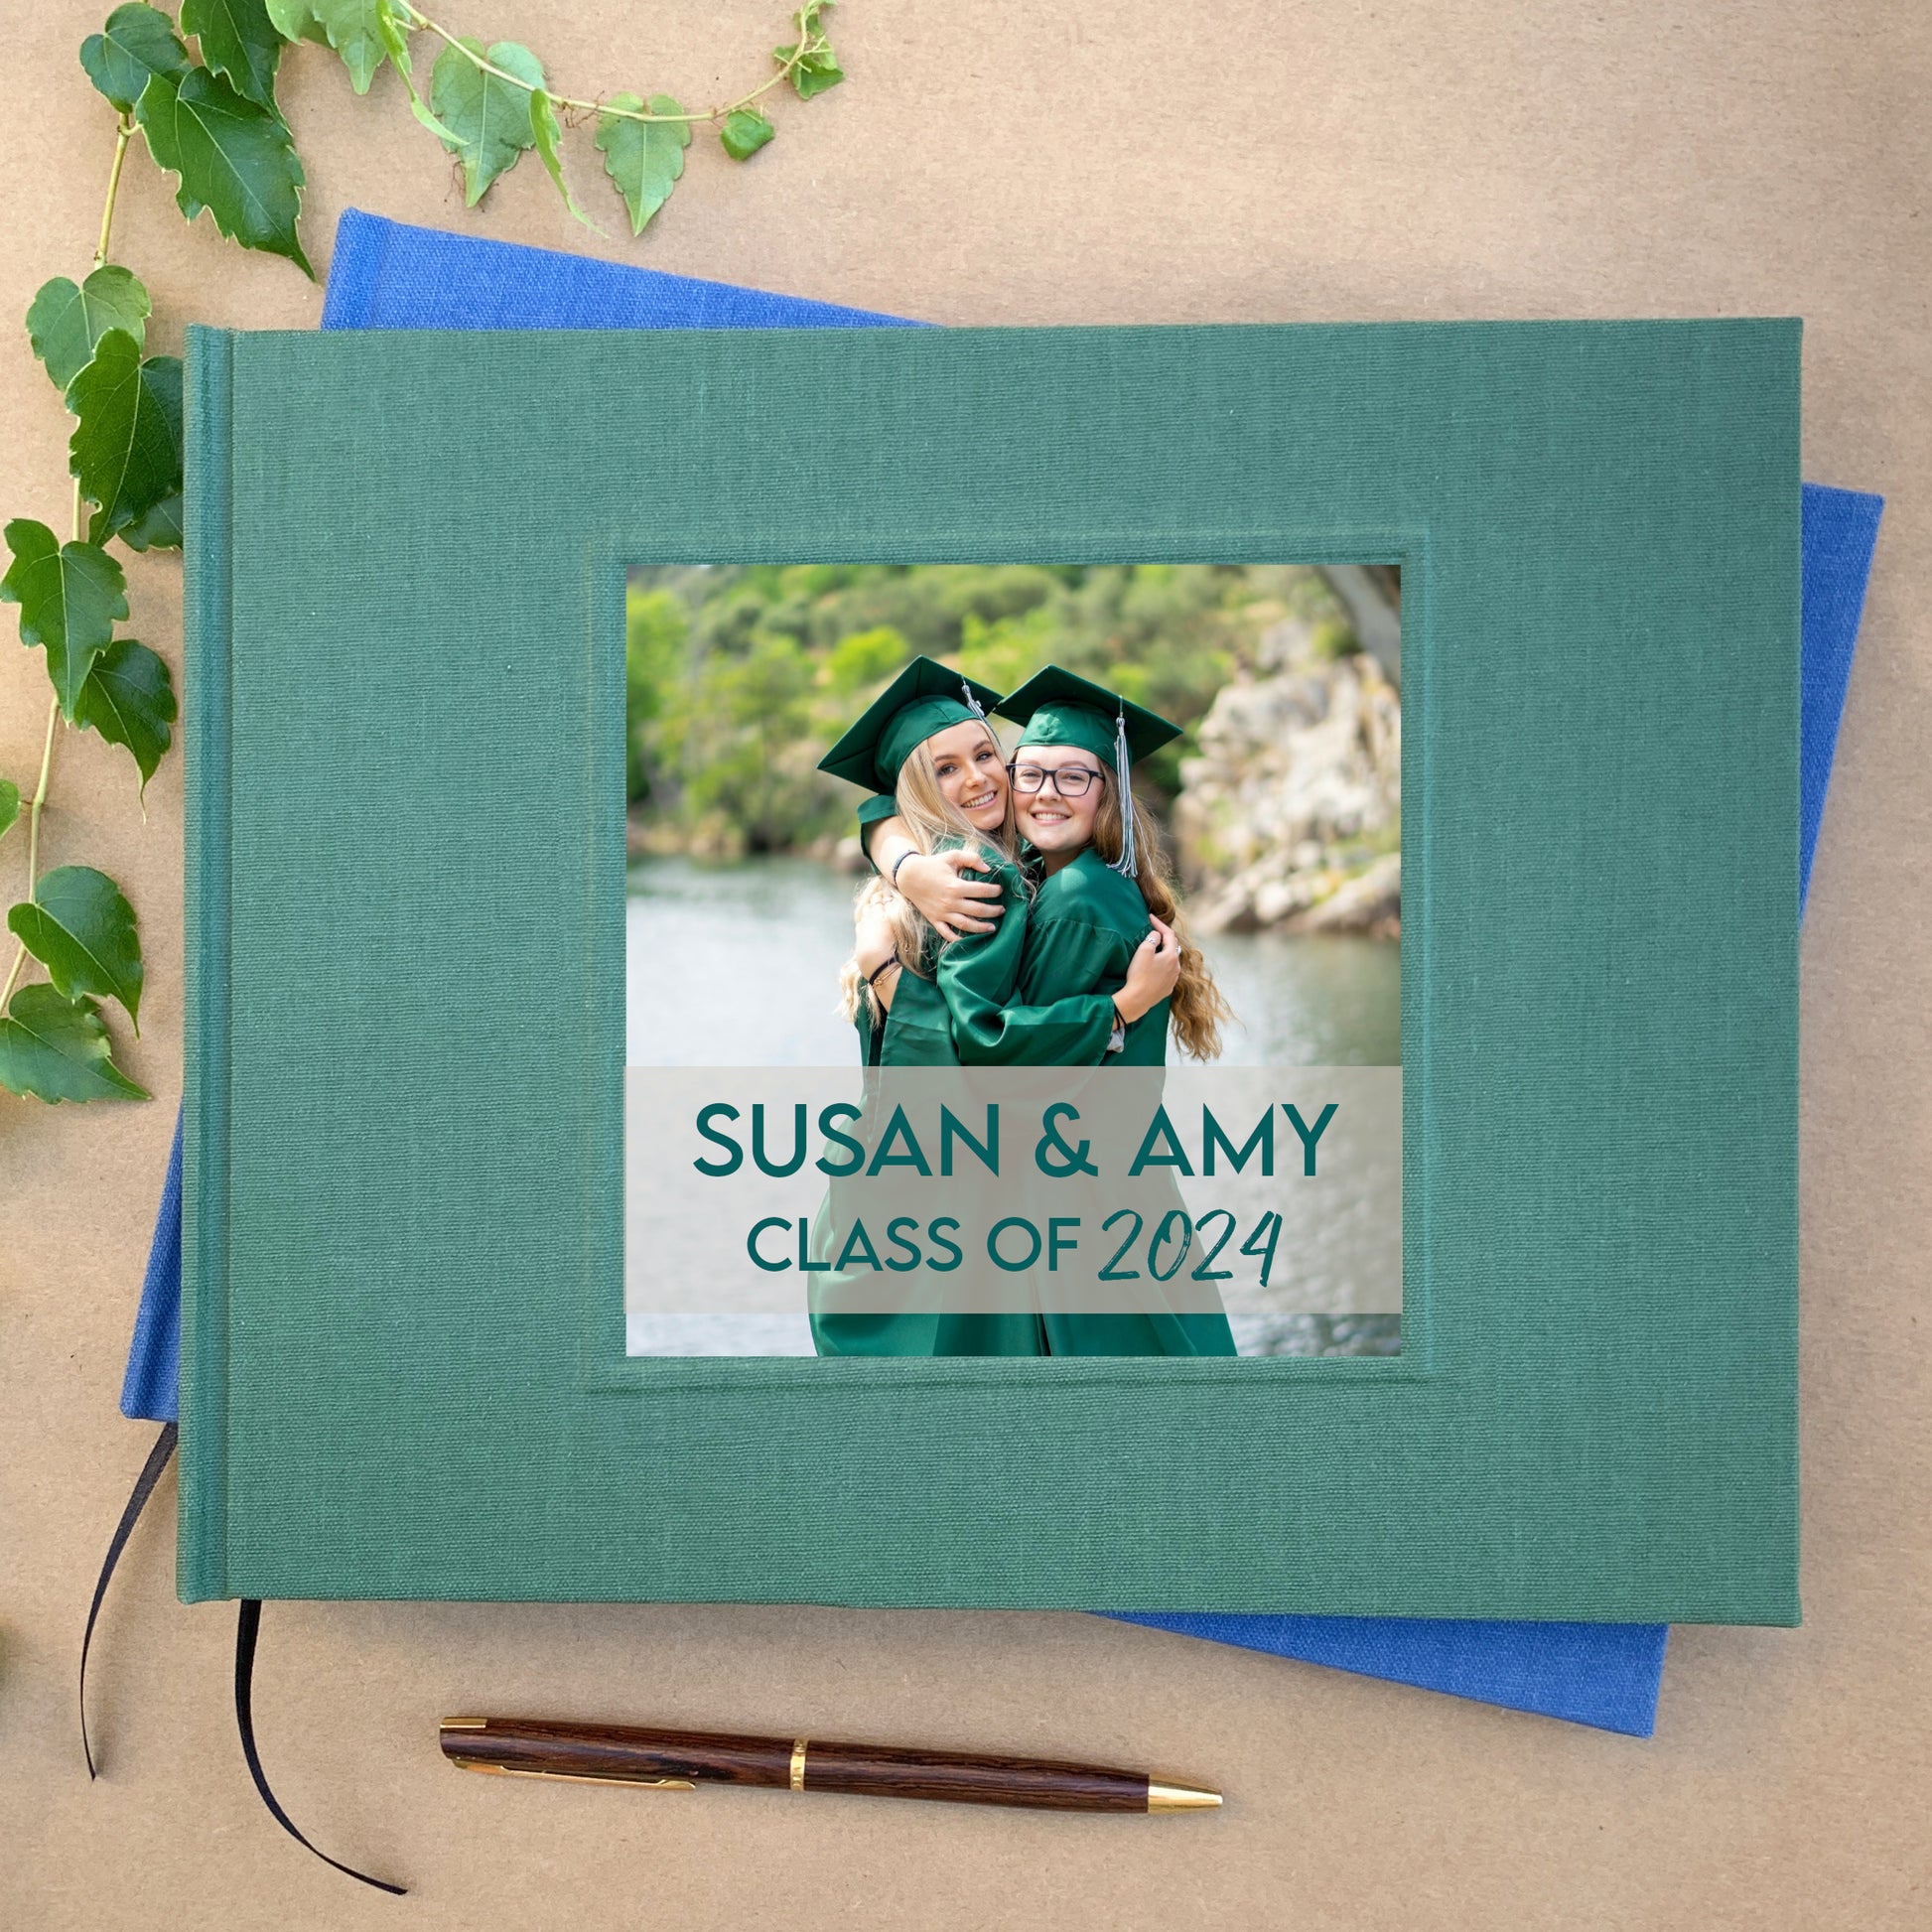 2024 Graduation Party Guest Book & Decor · Personalized Gift for the Graduate · Advice & Words of Wisdom Memory Book